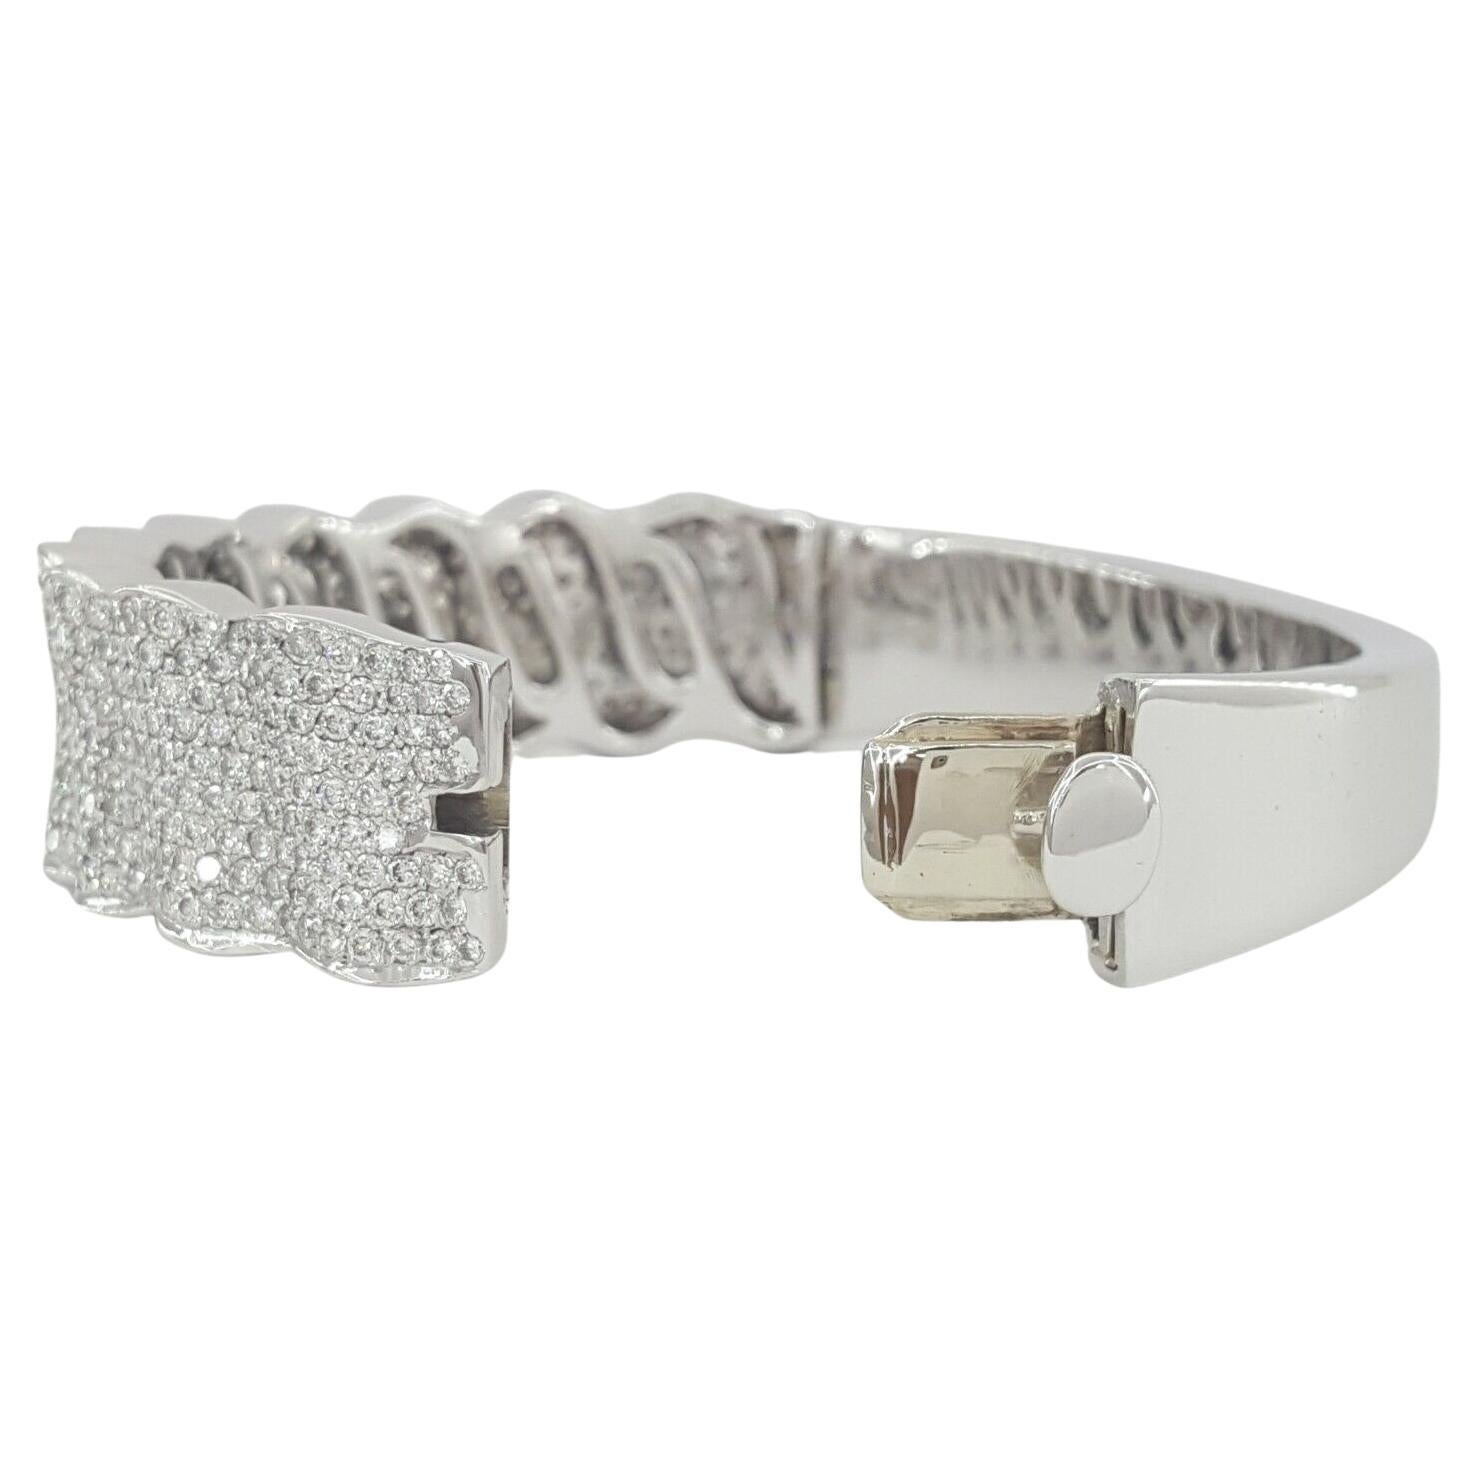 8K White Gold Round Brilliant Cut Diamonds Nine 9-Row Pave Wave Bangle / Bracelet. 

The bracelet weighs 59.2 grams, 6.5 inches long, contains 552 Natural Round Brilliant Cut Diamonds weighing approximately 10 ct, E-G in color, & VS1-SI1 in